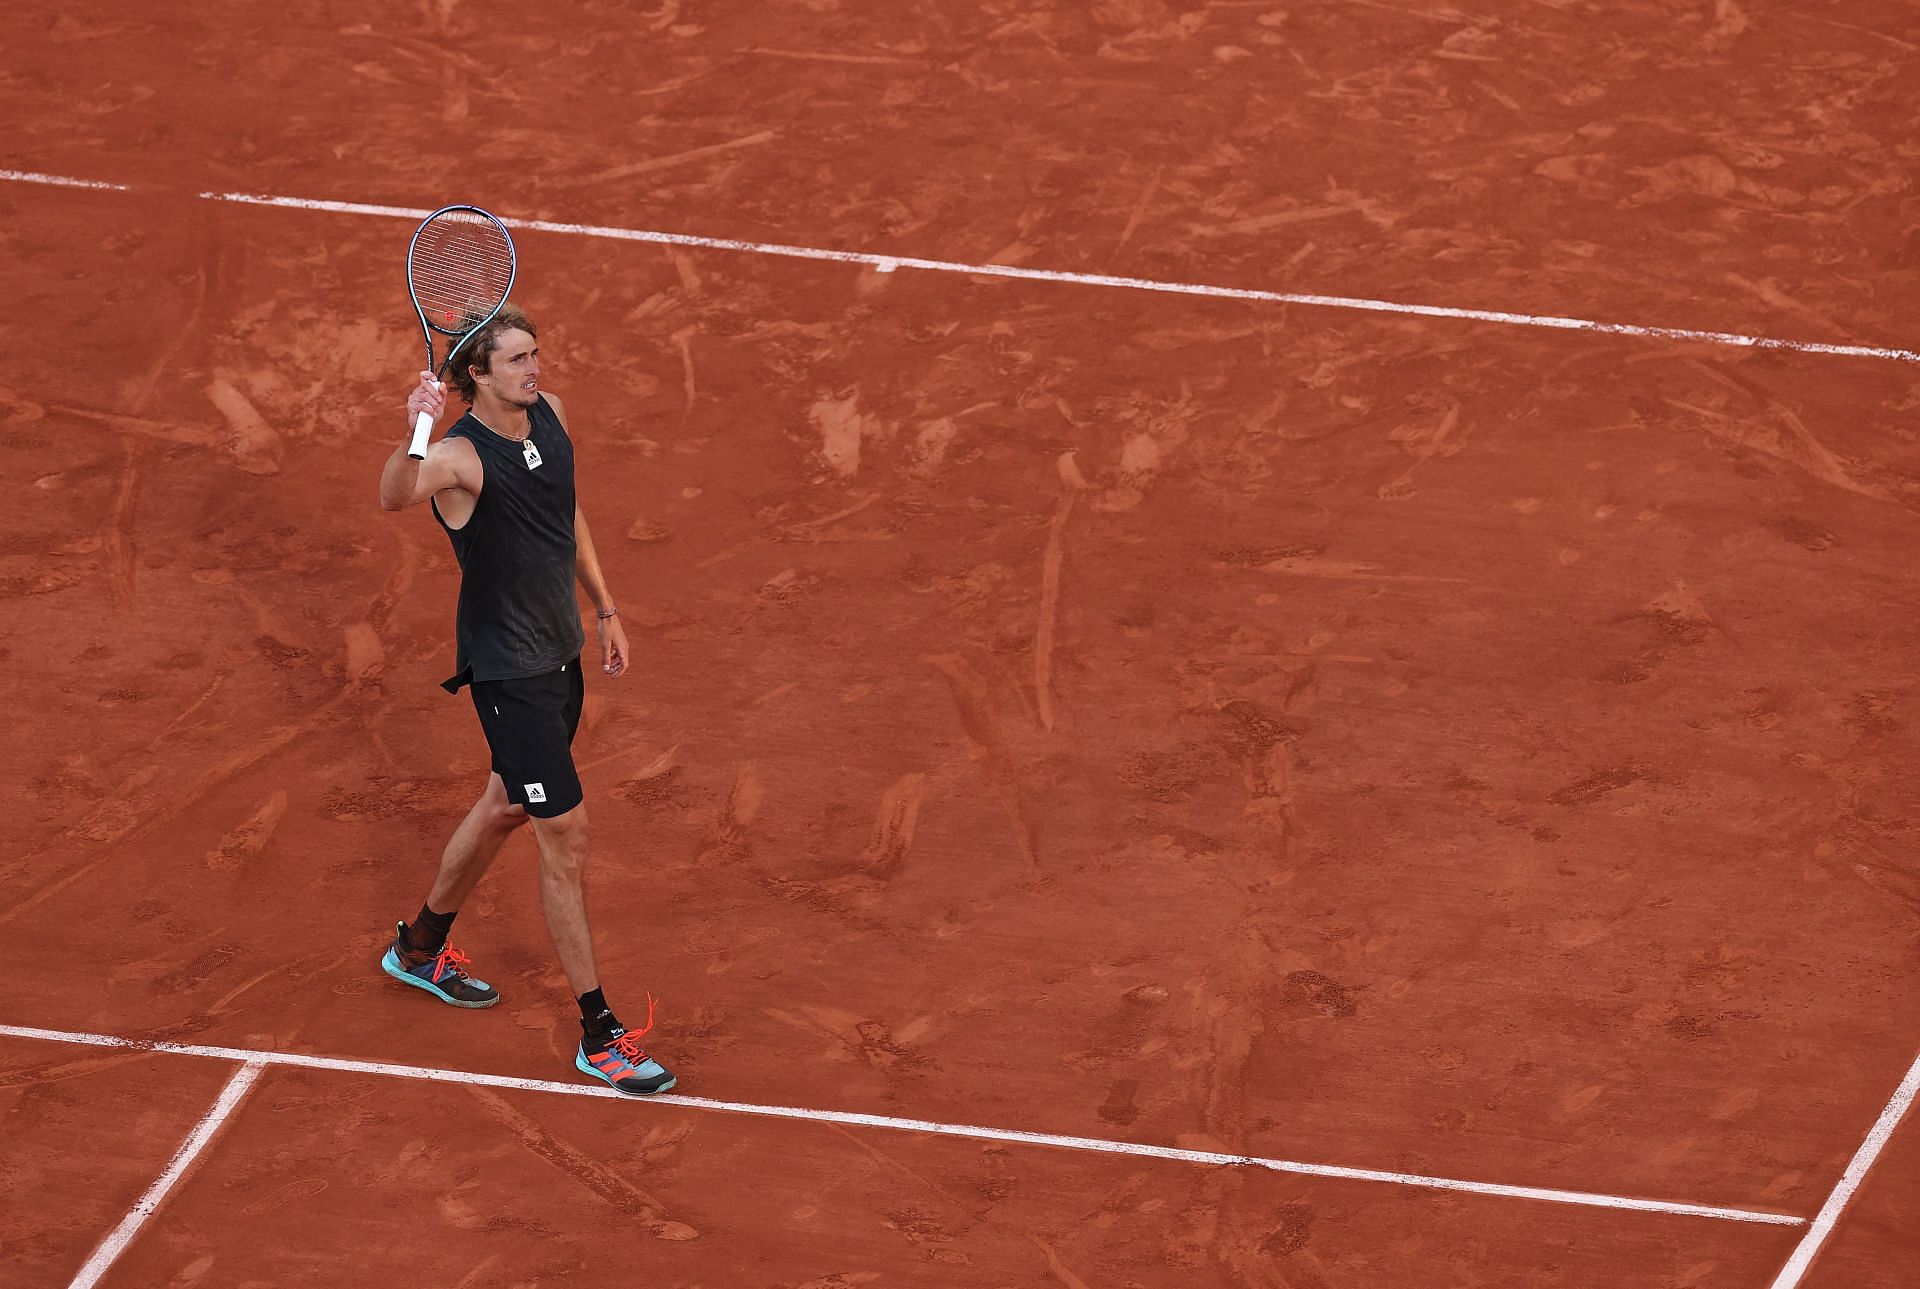 Alexander Zverev beat Carlos Alcaraz in the 2022 French Open quarterfinals to register his first Grand Slam win against a top-10 player.